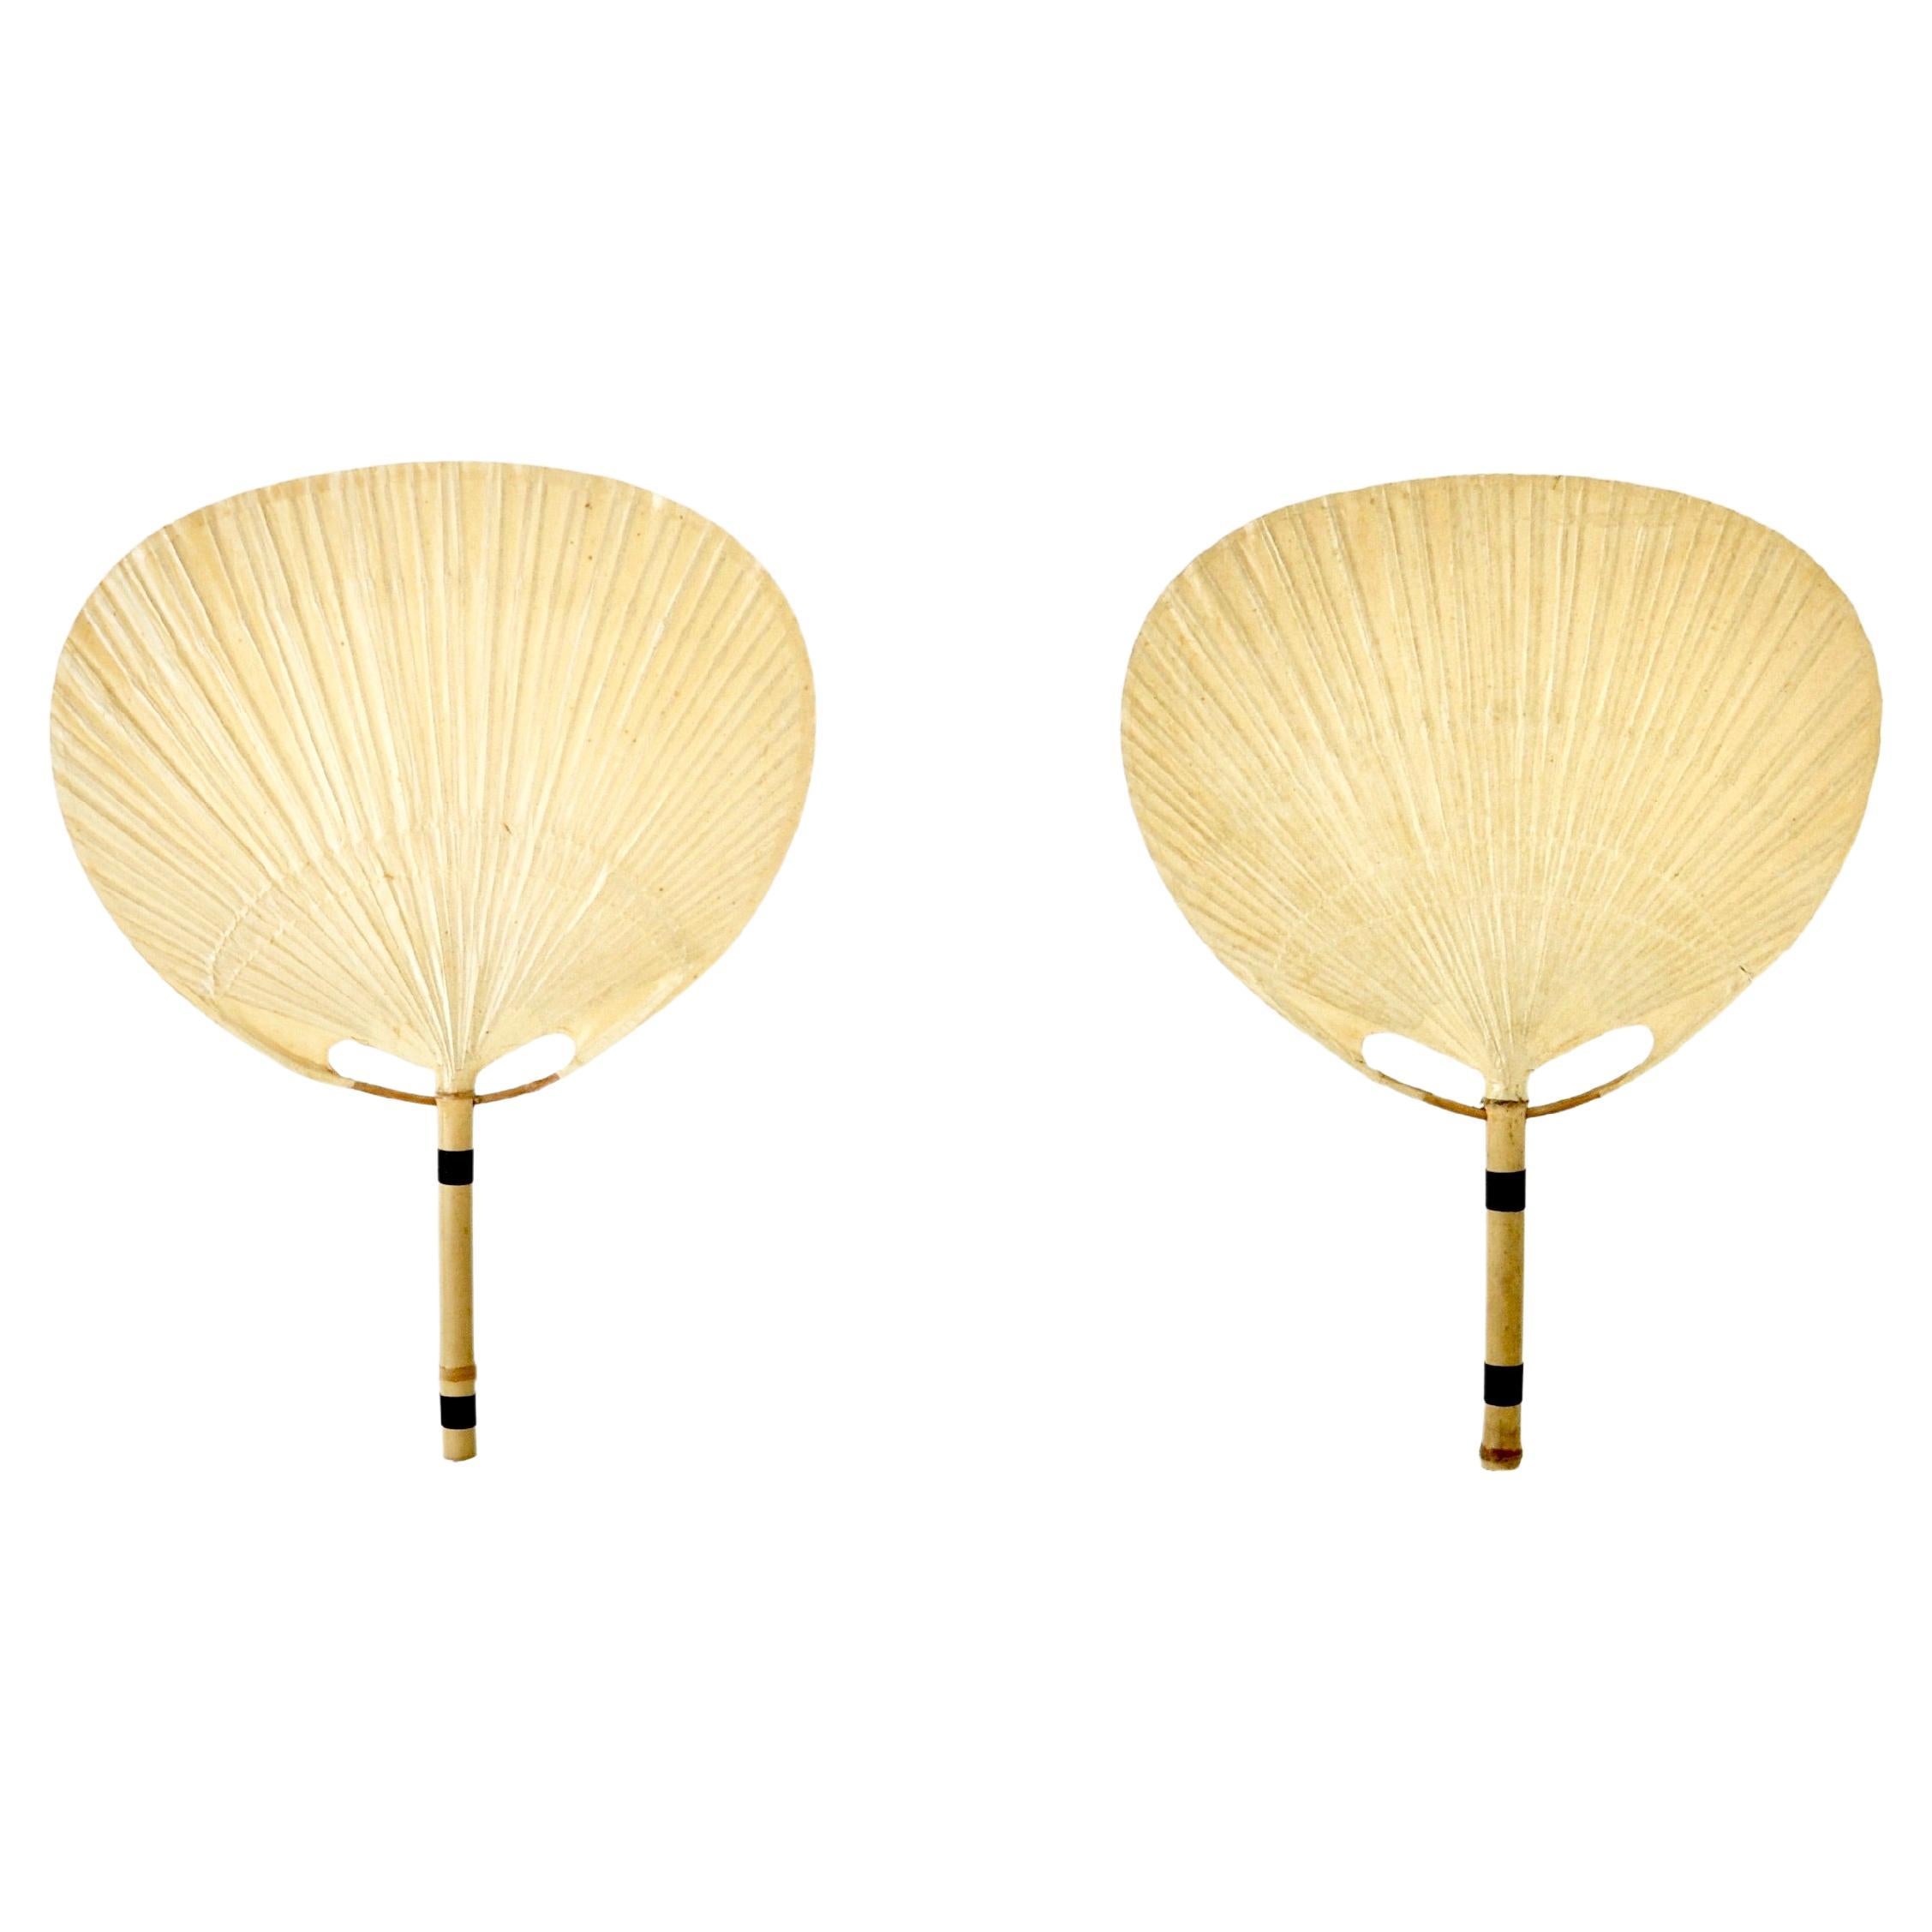 Pair of Uchiwa Wall Lamps by Ingo Maurer for M Design, 1970s